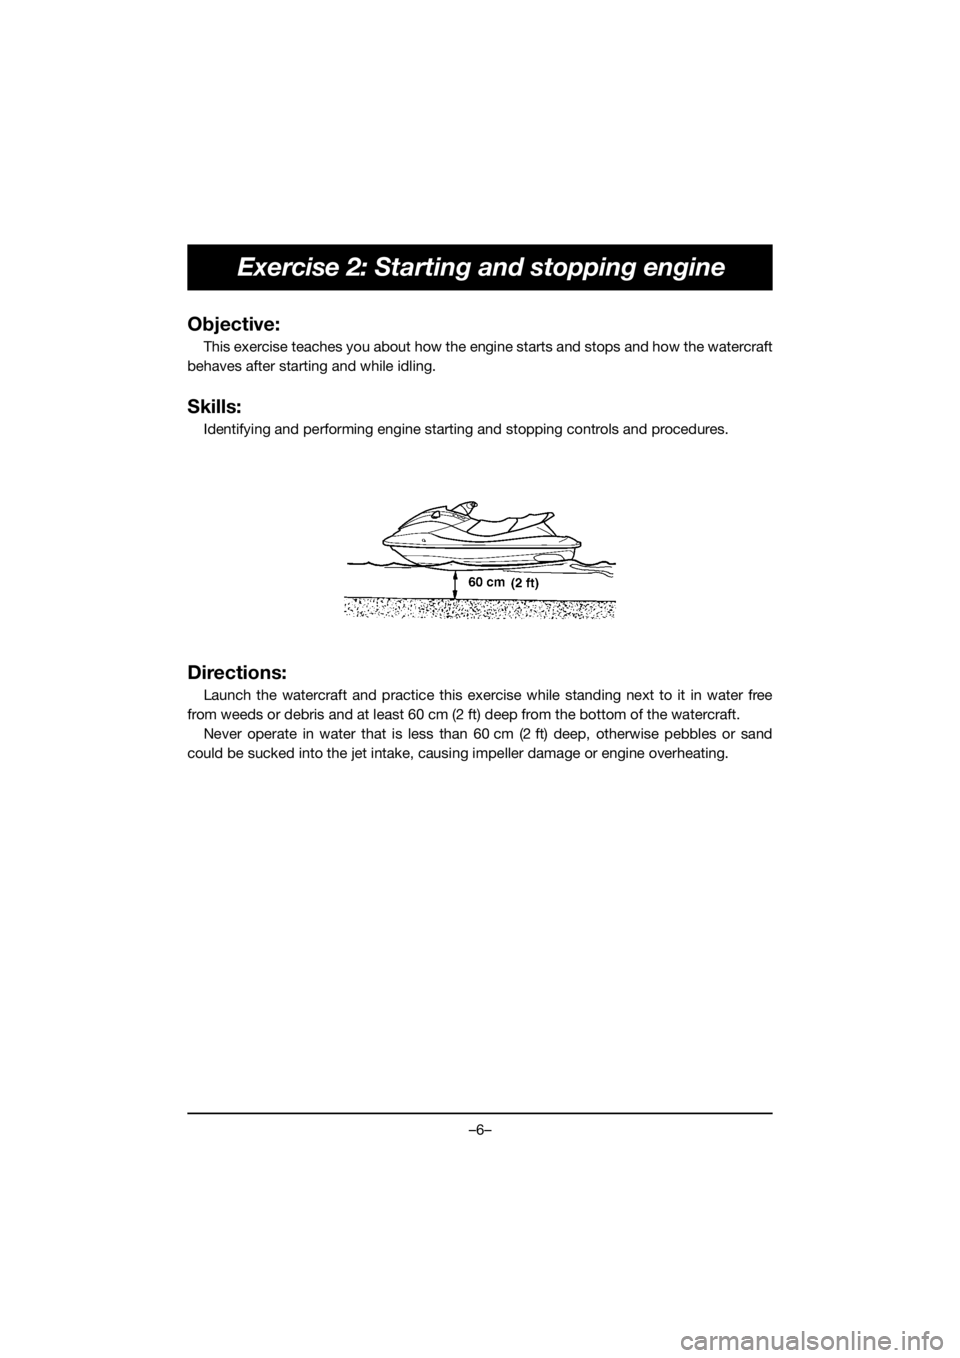 YAMAHA FX HO 2019  Owners Manual –6–
Exercise 2: Starting and stopping engine
Objective:
This exercise teaches you about how the engine starts and stops and how the watercraft
behaves after starting and while idling.
Skills:
Iden